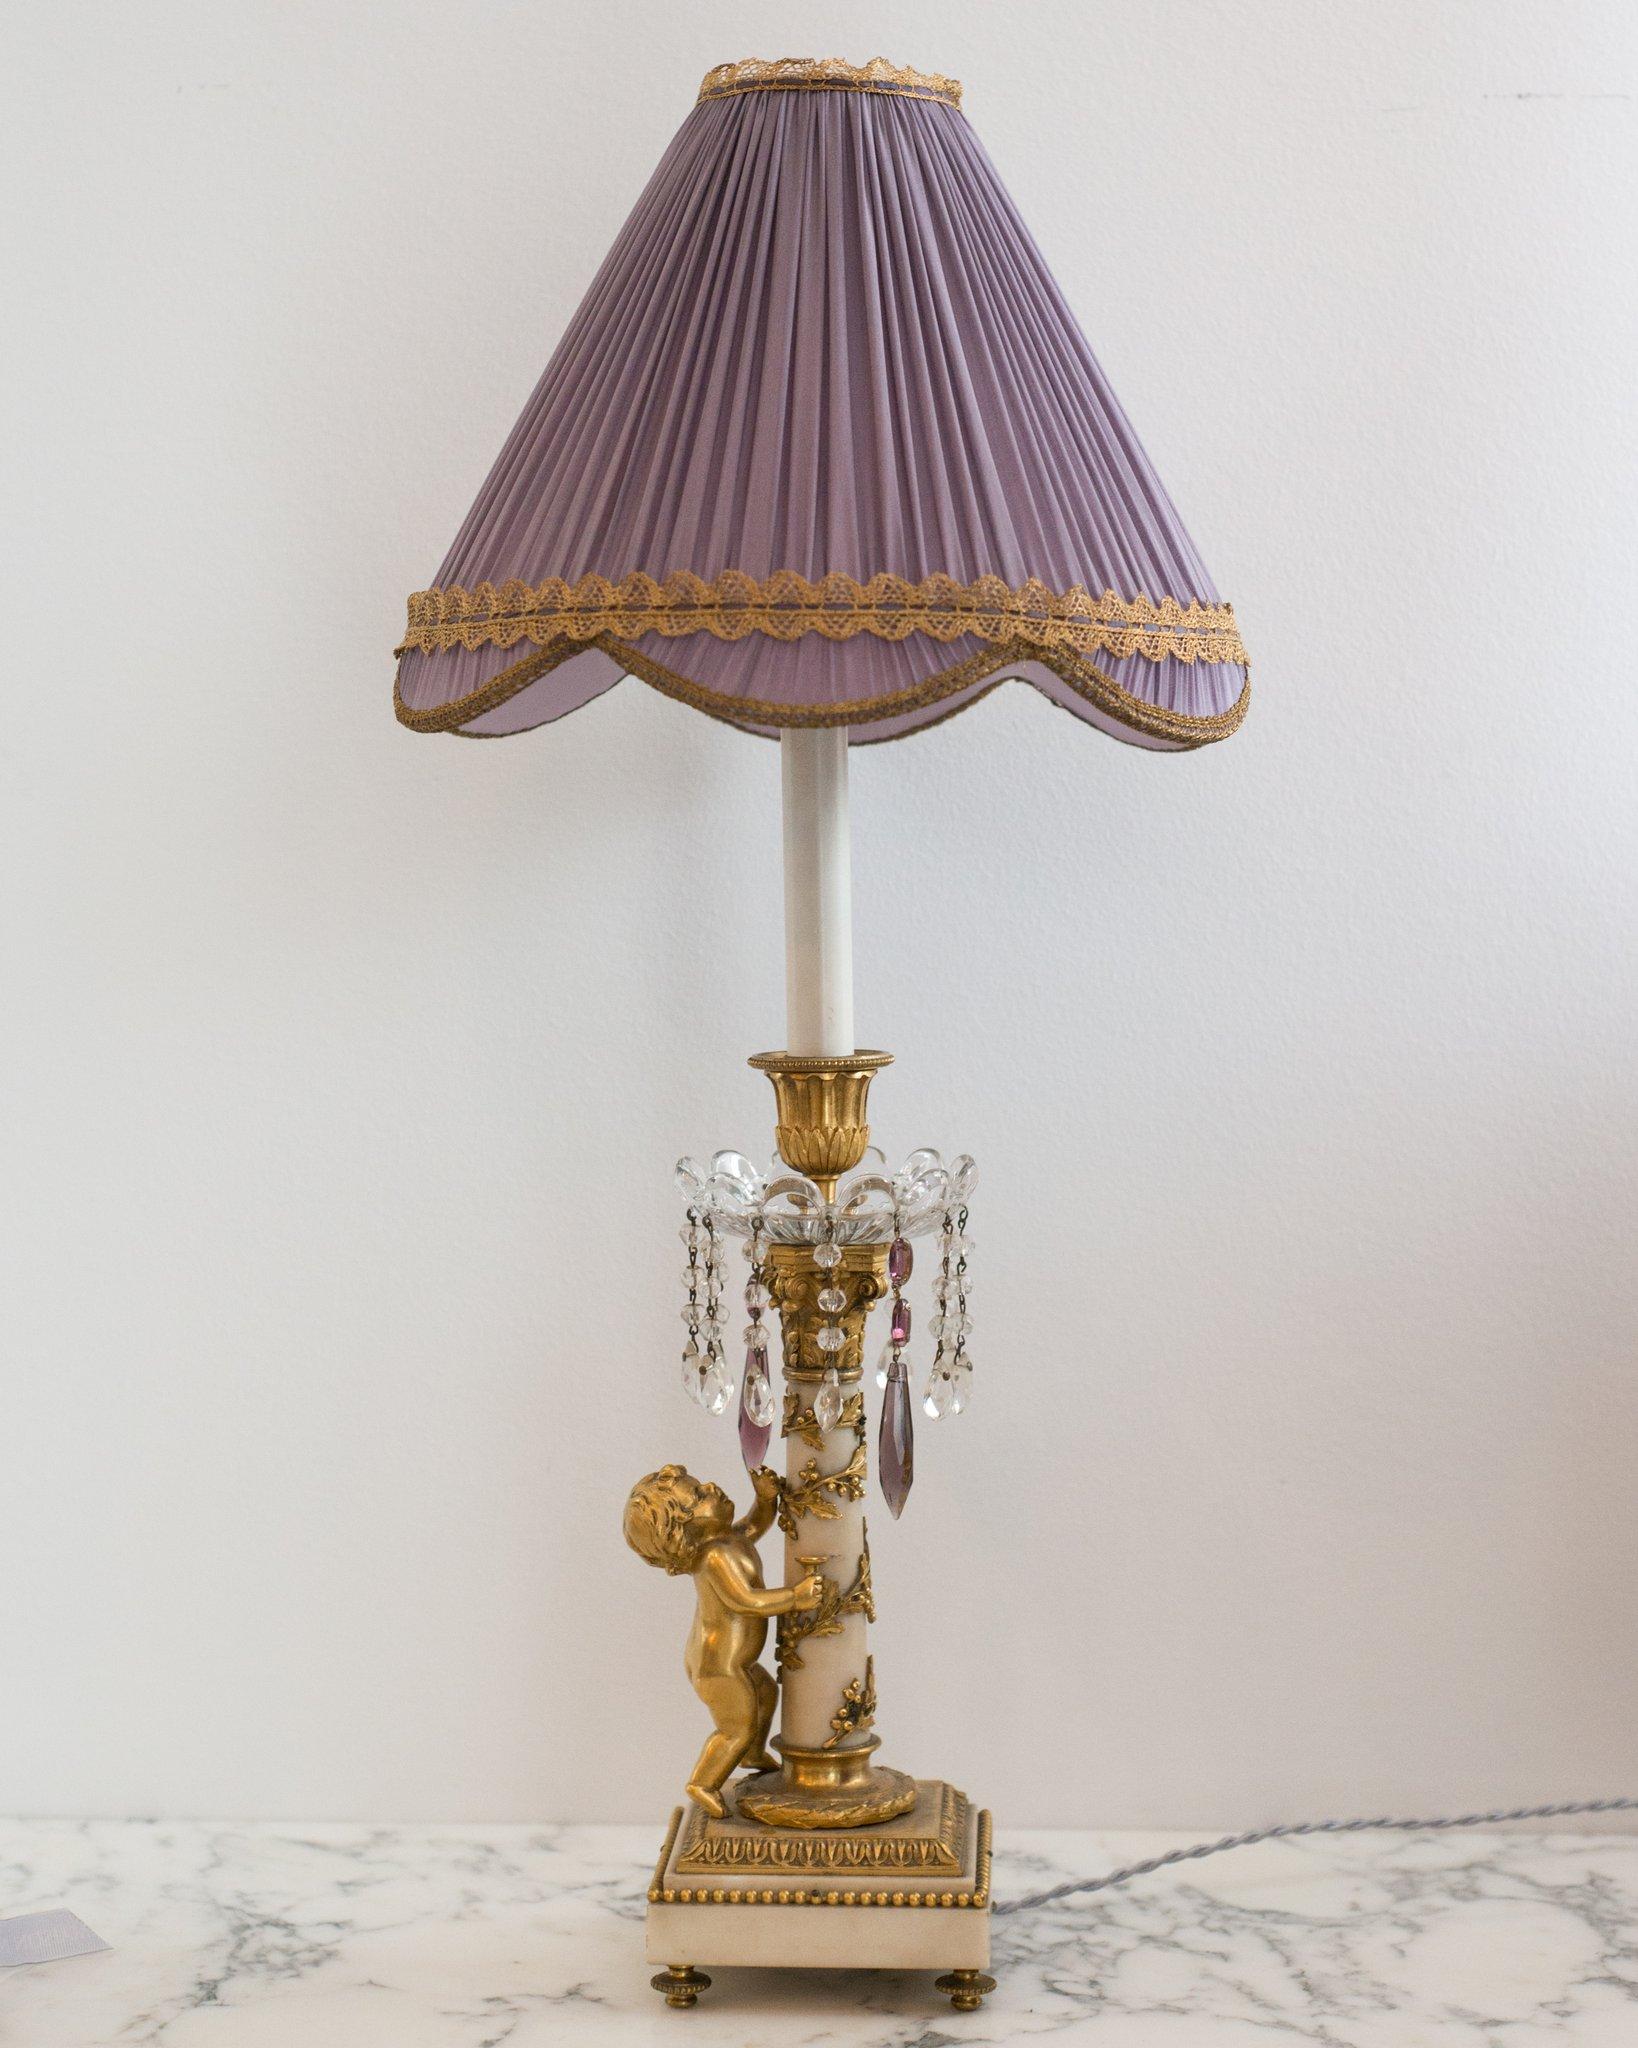 A French Antique marble and bronze lamp with crystal and amethyst drops and a bronze cherub, circa 1880. Newly rewired with a silk cord and custom pleated lavender silk shade with vintage metallic trim.